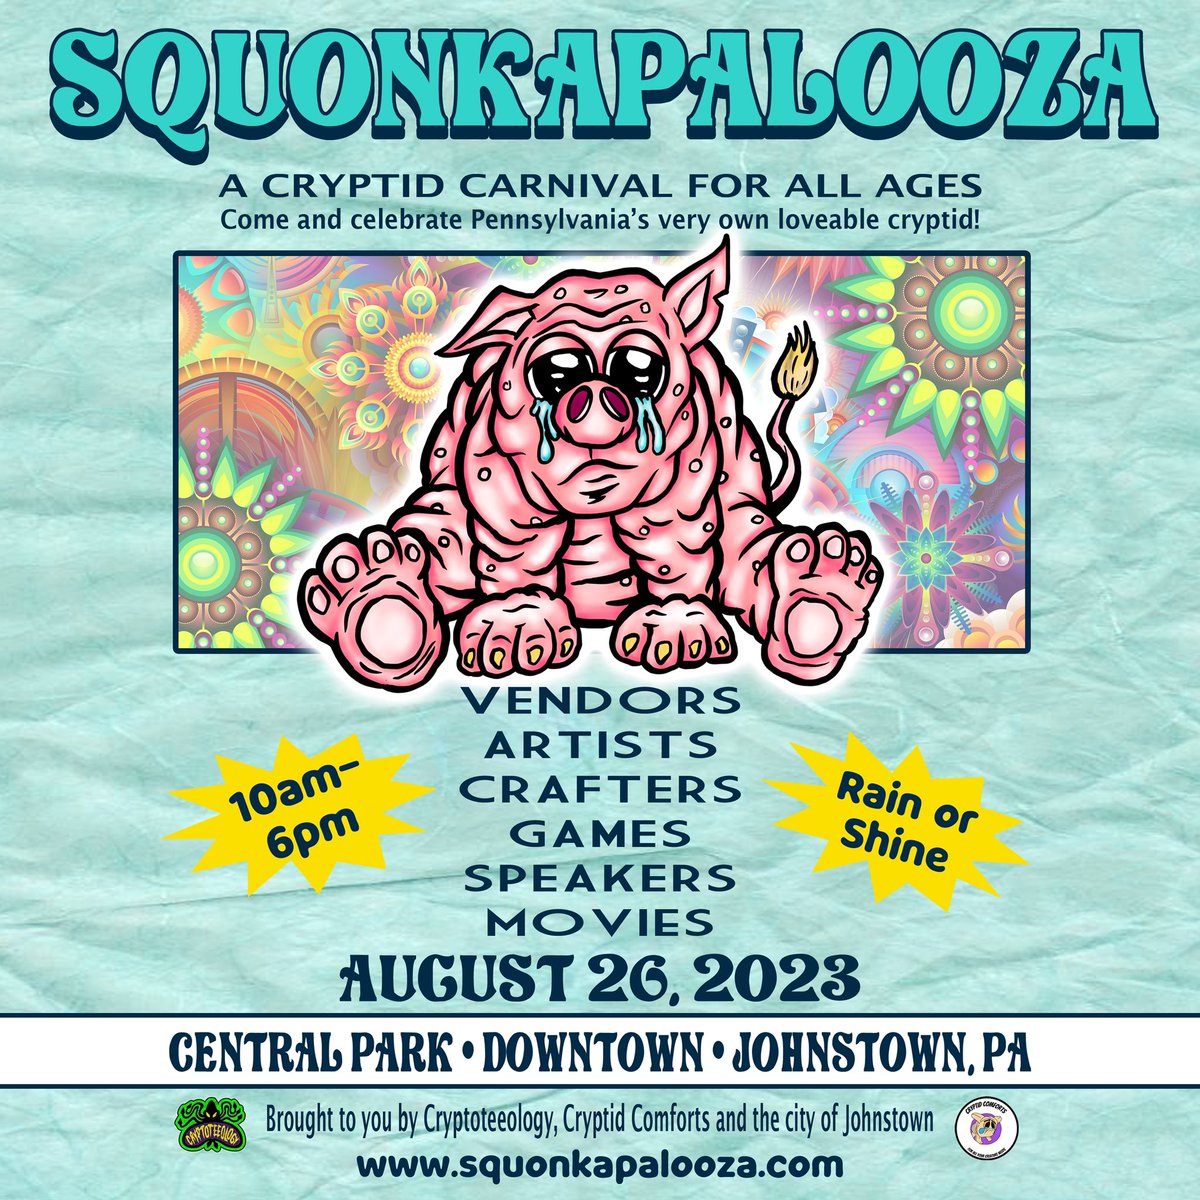 GET SQUONKED!

#cryptoteeology #cryptidcomforts #squonk #squonkapalooza #squonkfest2023 #squonkfest #cryptids #johnstownpa #westernpennsylvania #cambriacounty #cambriacountypa #artists #eventflyer #poster #posterdesign #illustration #vendorshow #centralparkjohnstown